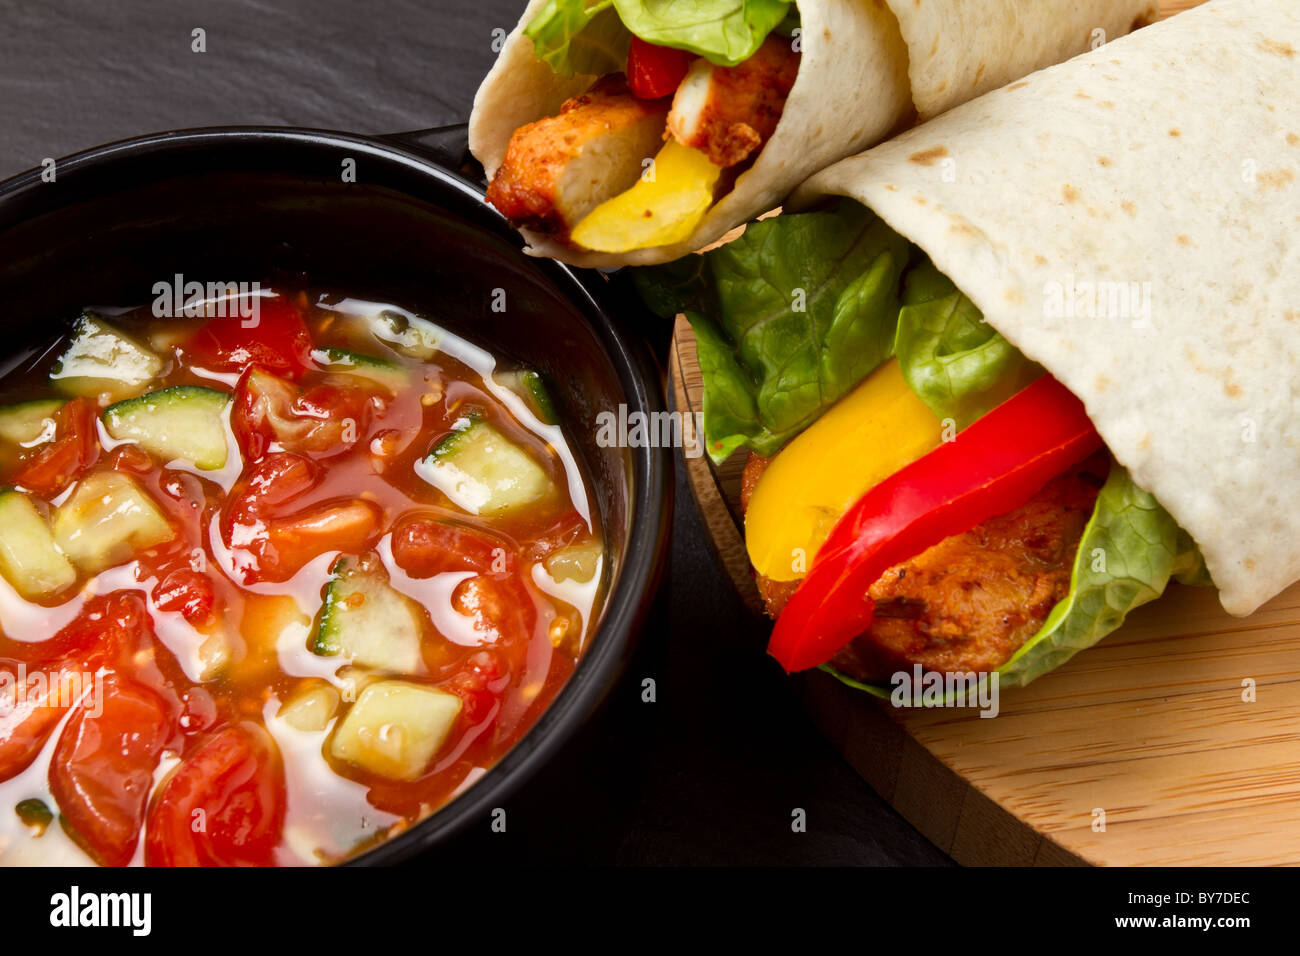 Spicy chicken wrap and pot of vibrant salsa. Stock Photo